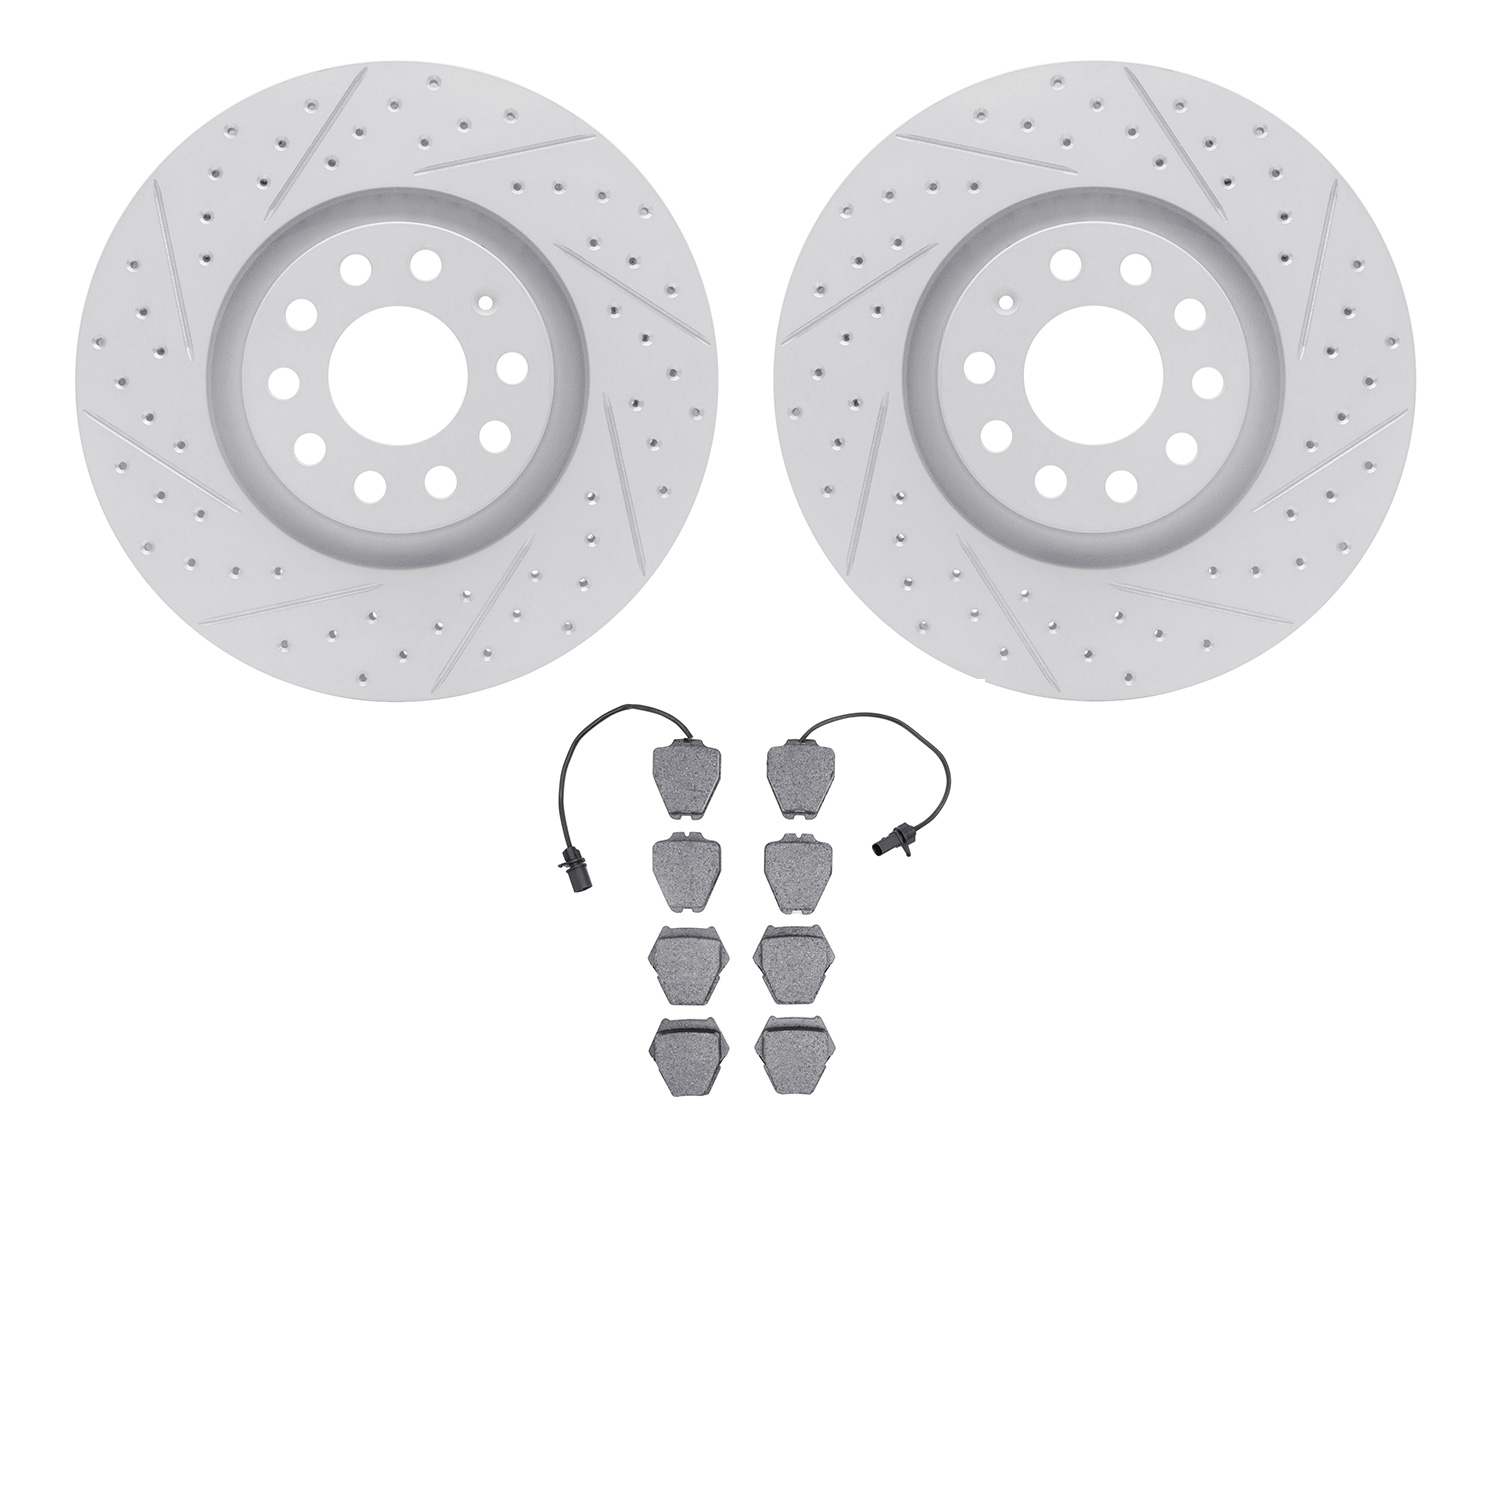 2502-73023 Geoperformance Drilled/Slotted Rotors w/5000 Advanced Brake Pads Kit, 1999-2005 Audi/Volkswagen, Position: Front